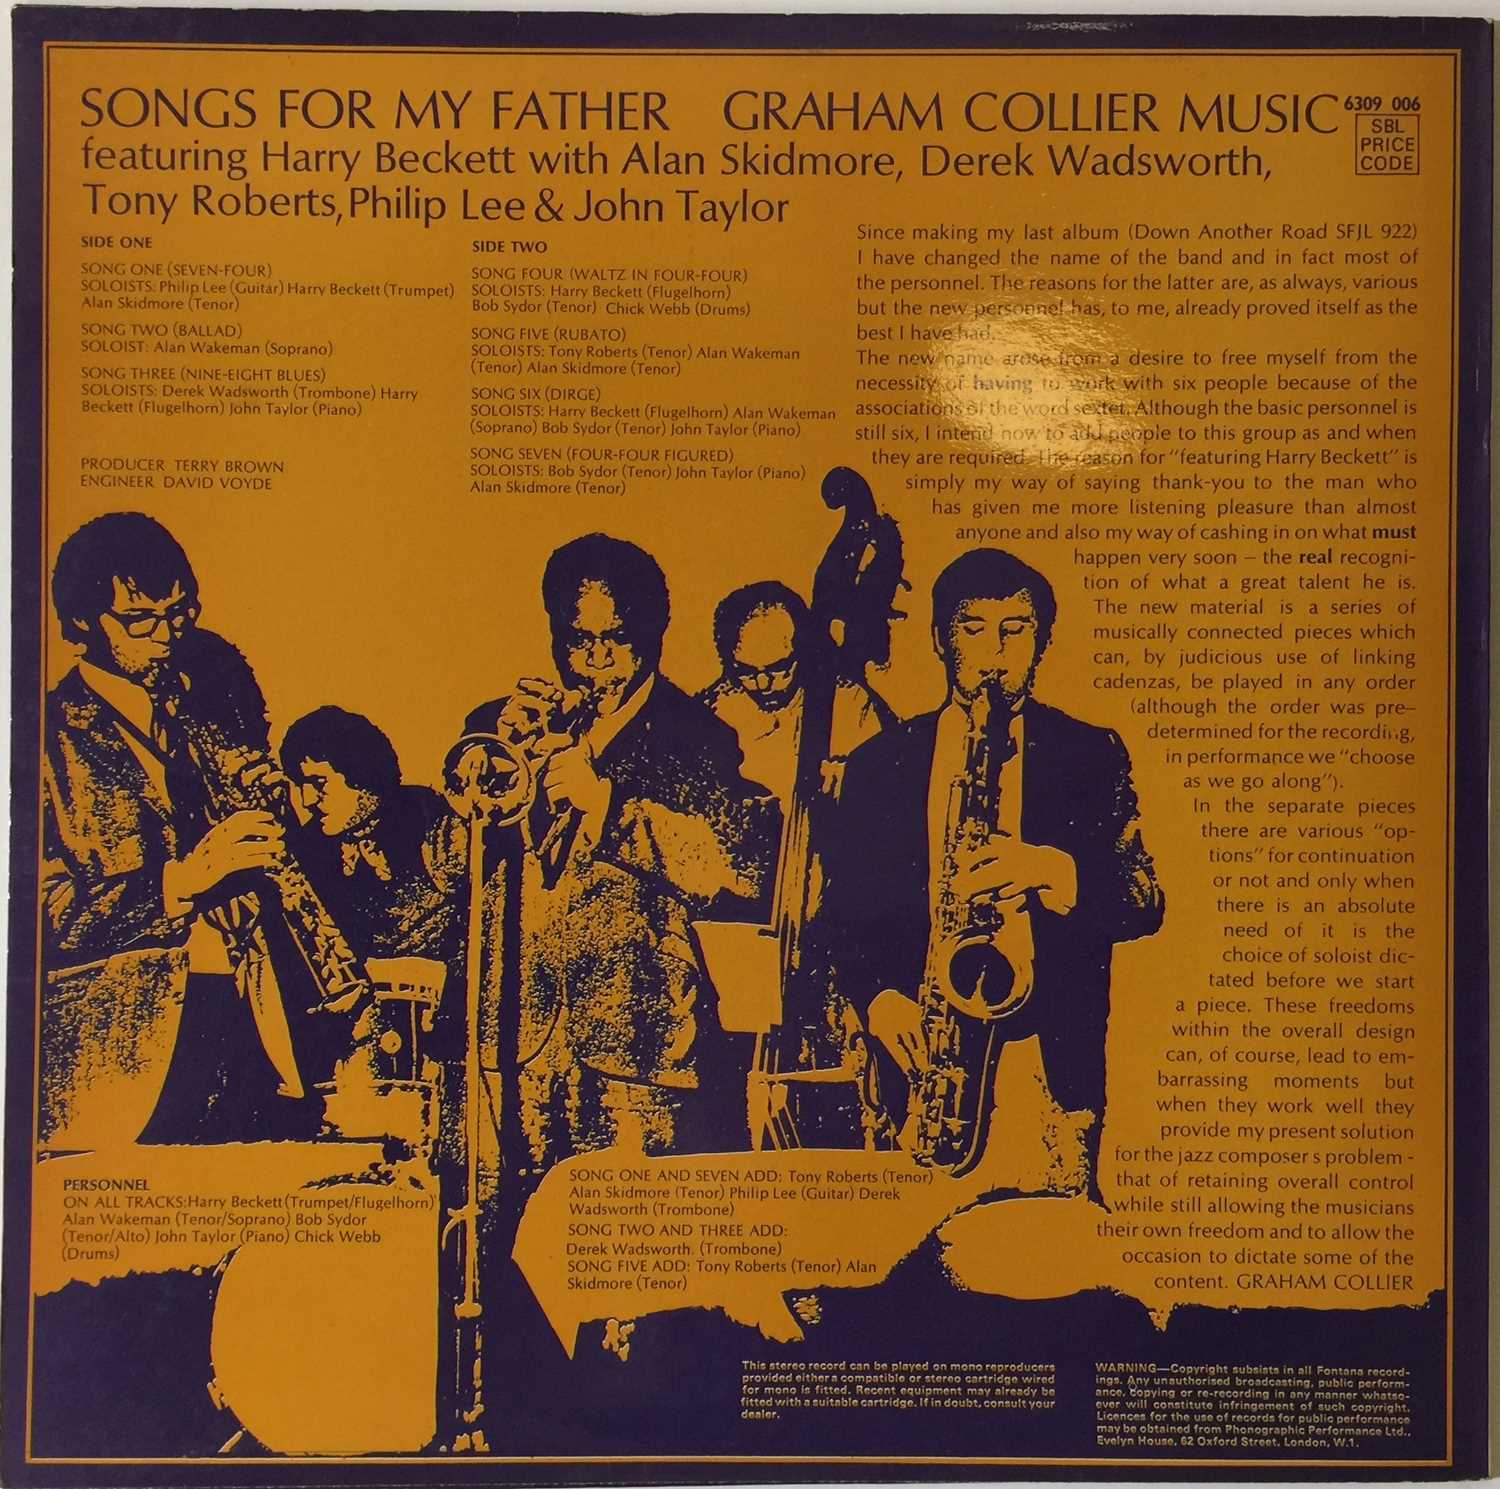 GRAHAM COLLIER MUSIC - SONGS FOR MY FATHER LP (UK PHILIPS - 6309 006) - Image 3 of 5